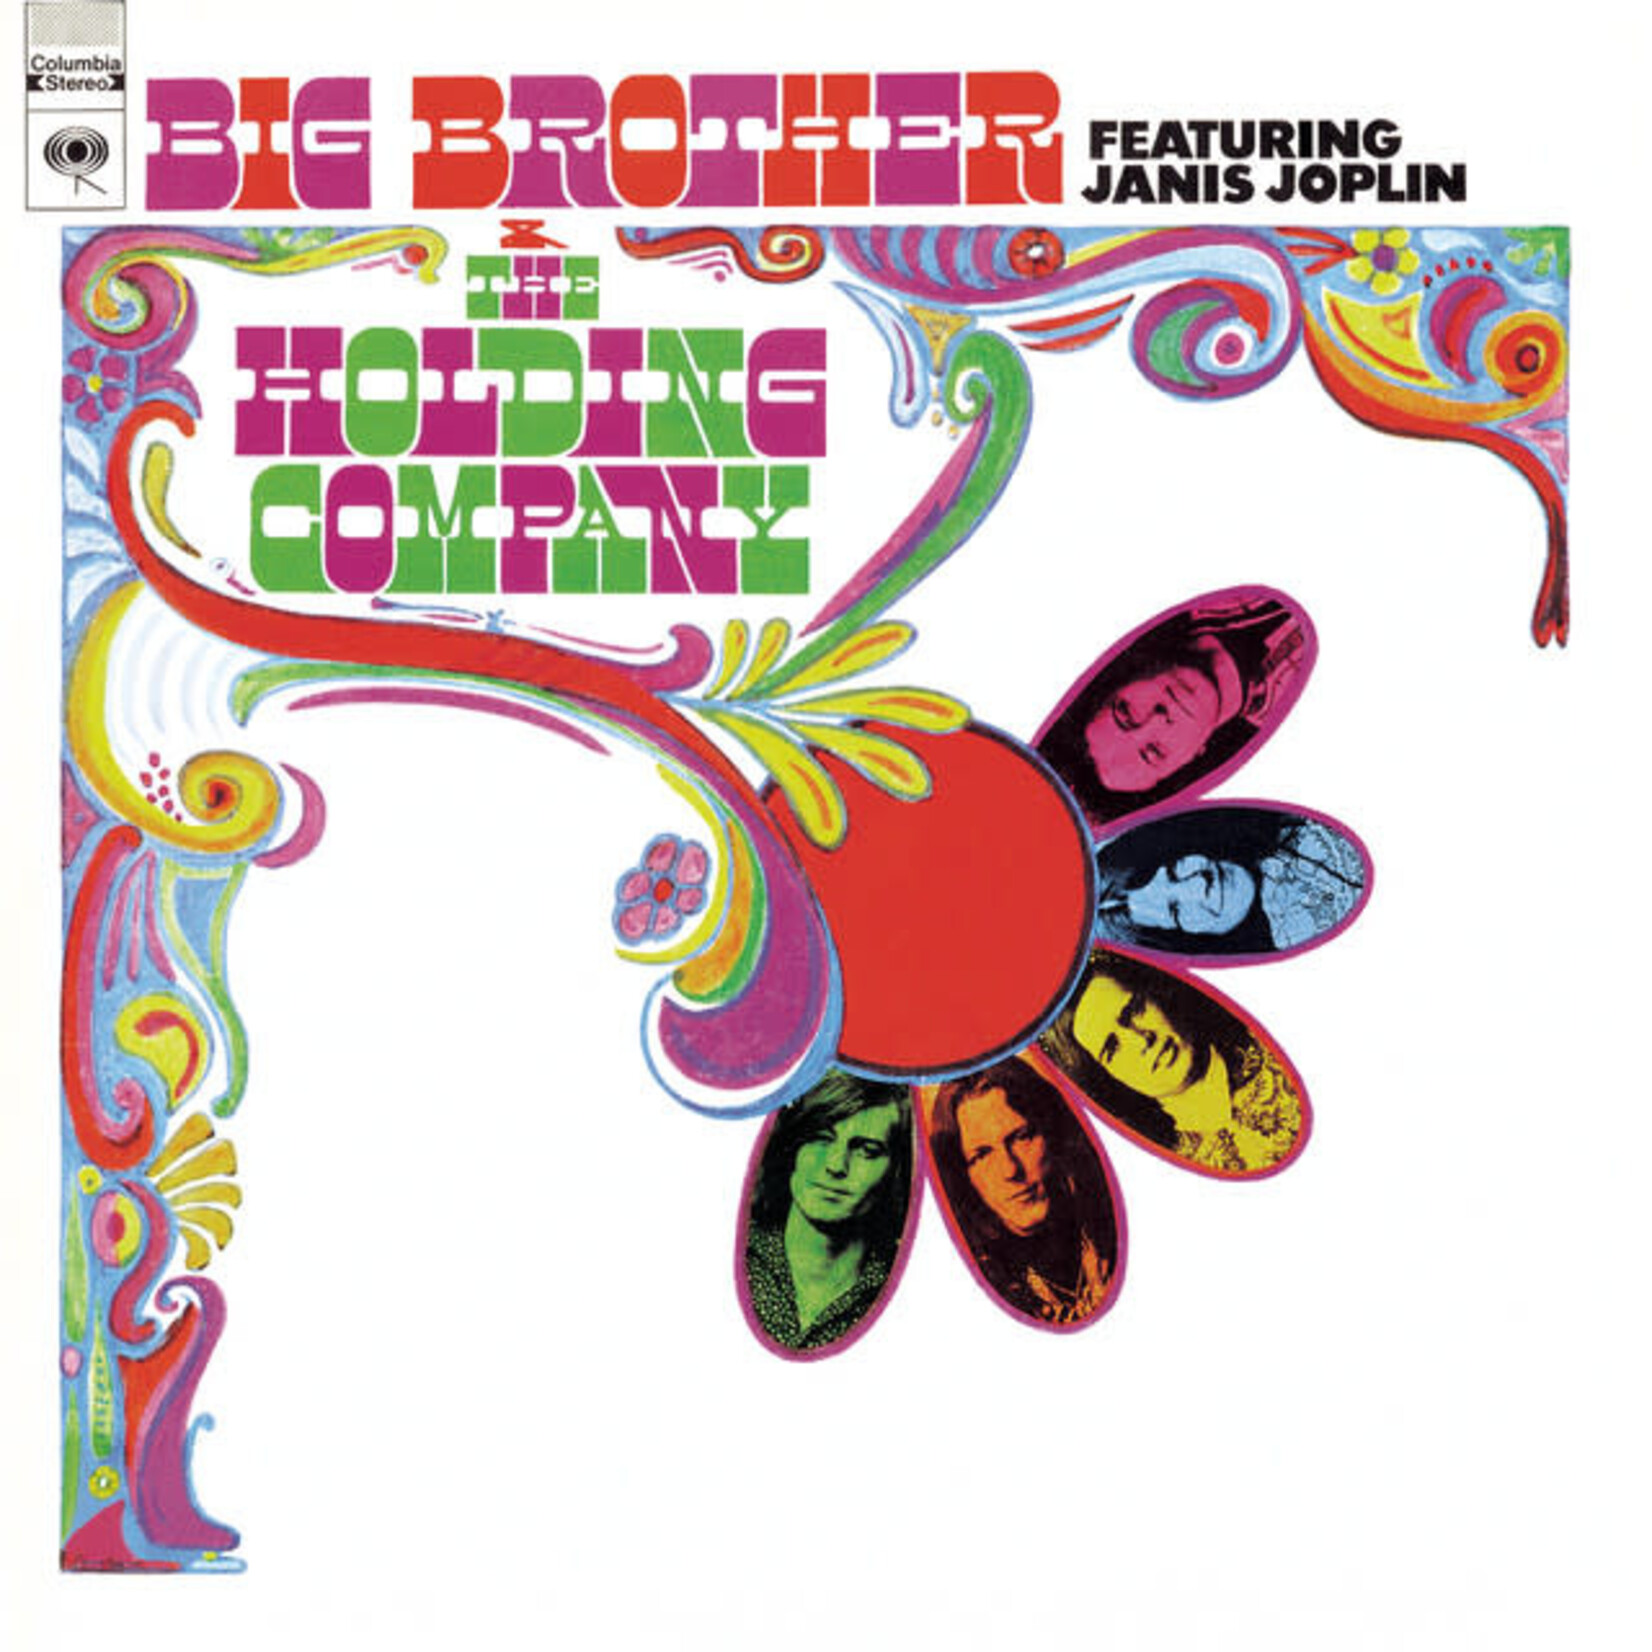 Big Brother & The Holding Company - Big Brother & The Holding Company [CD]